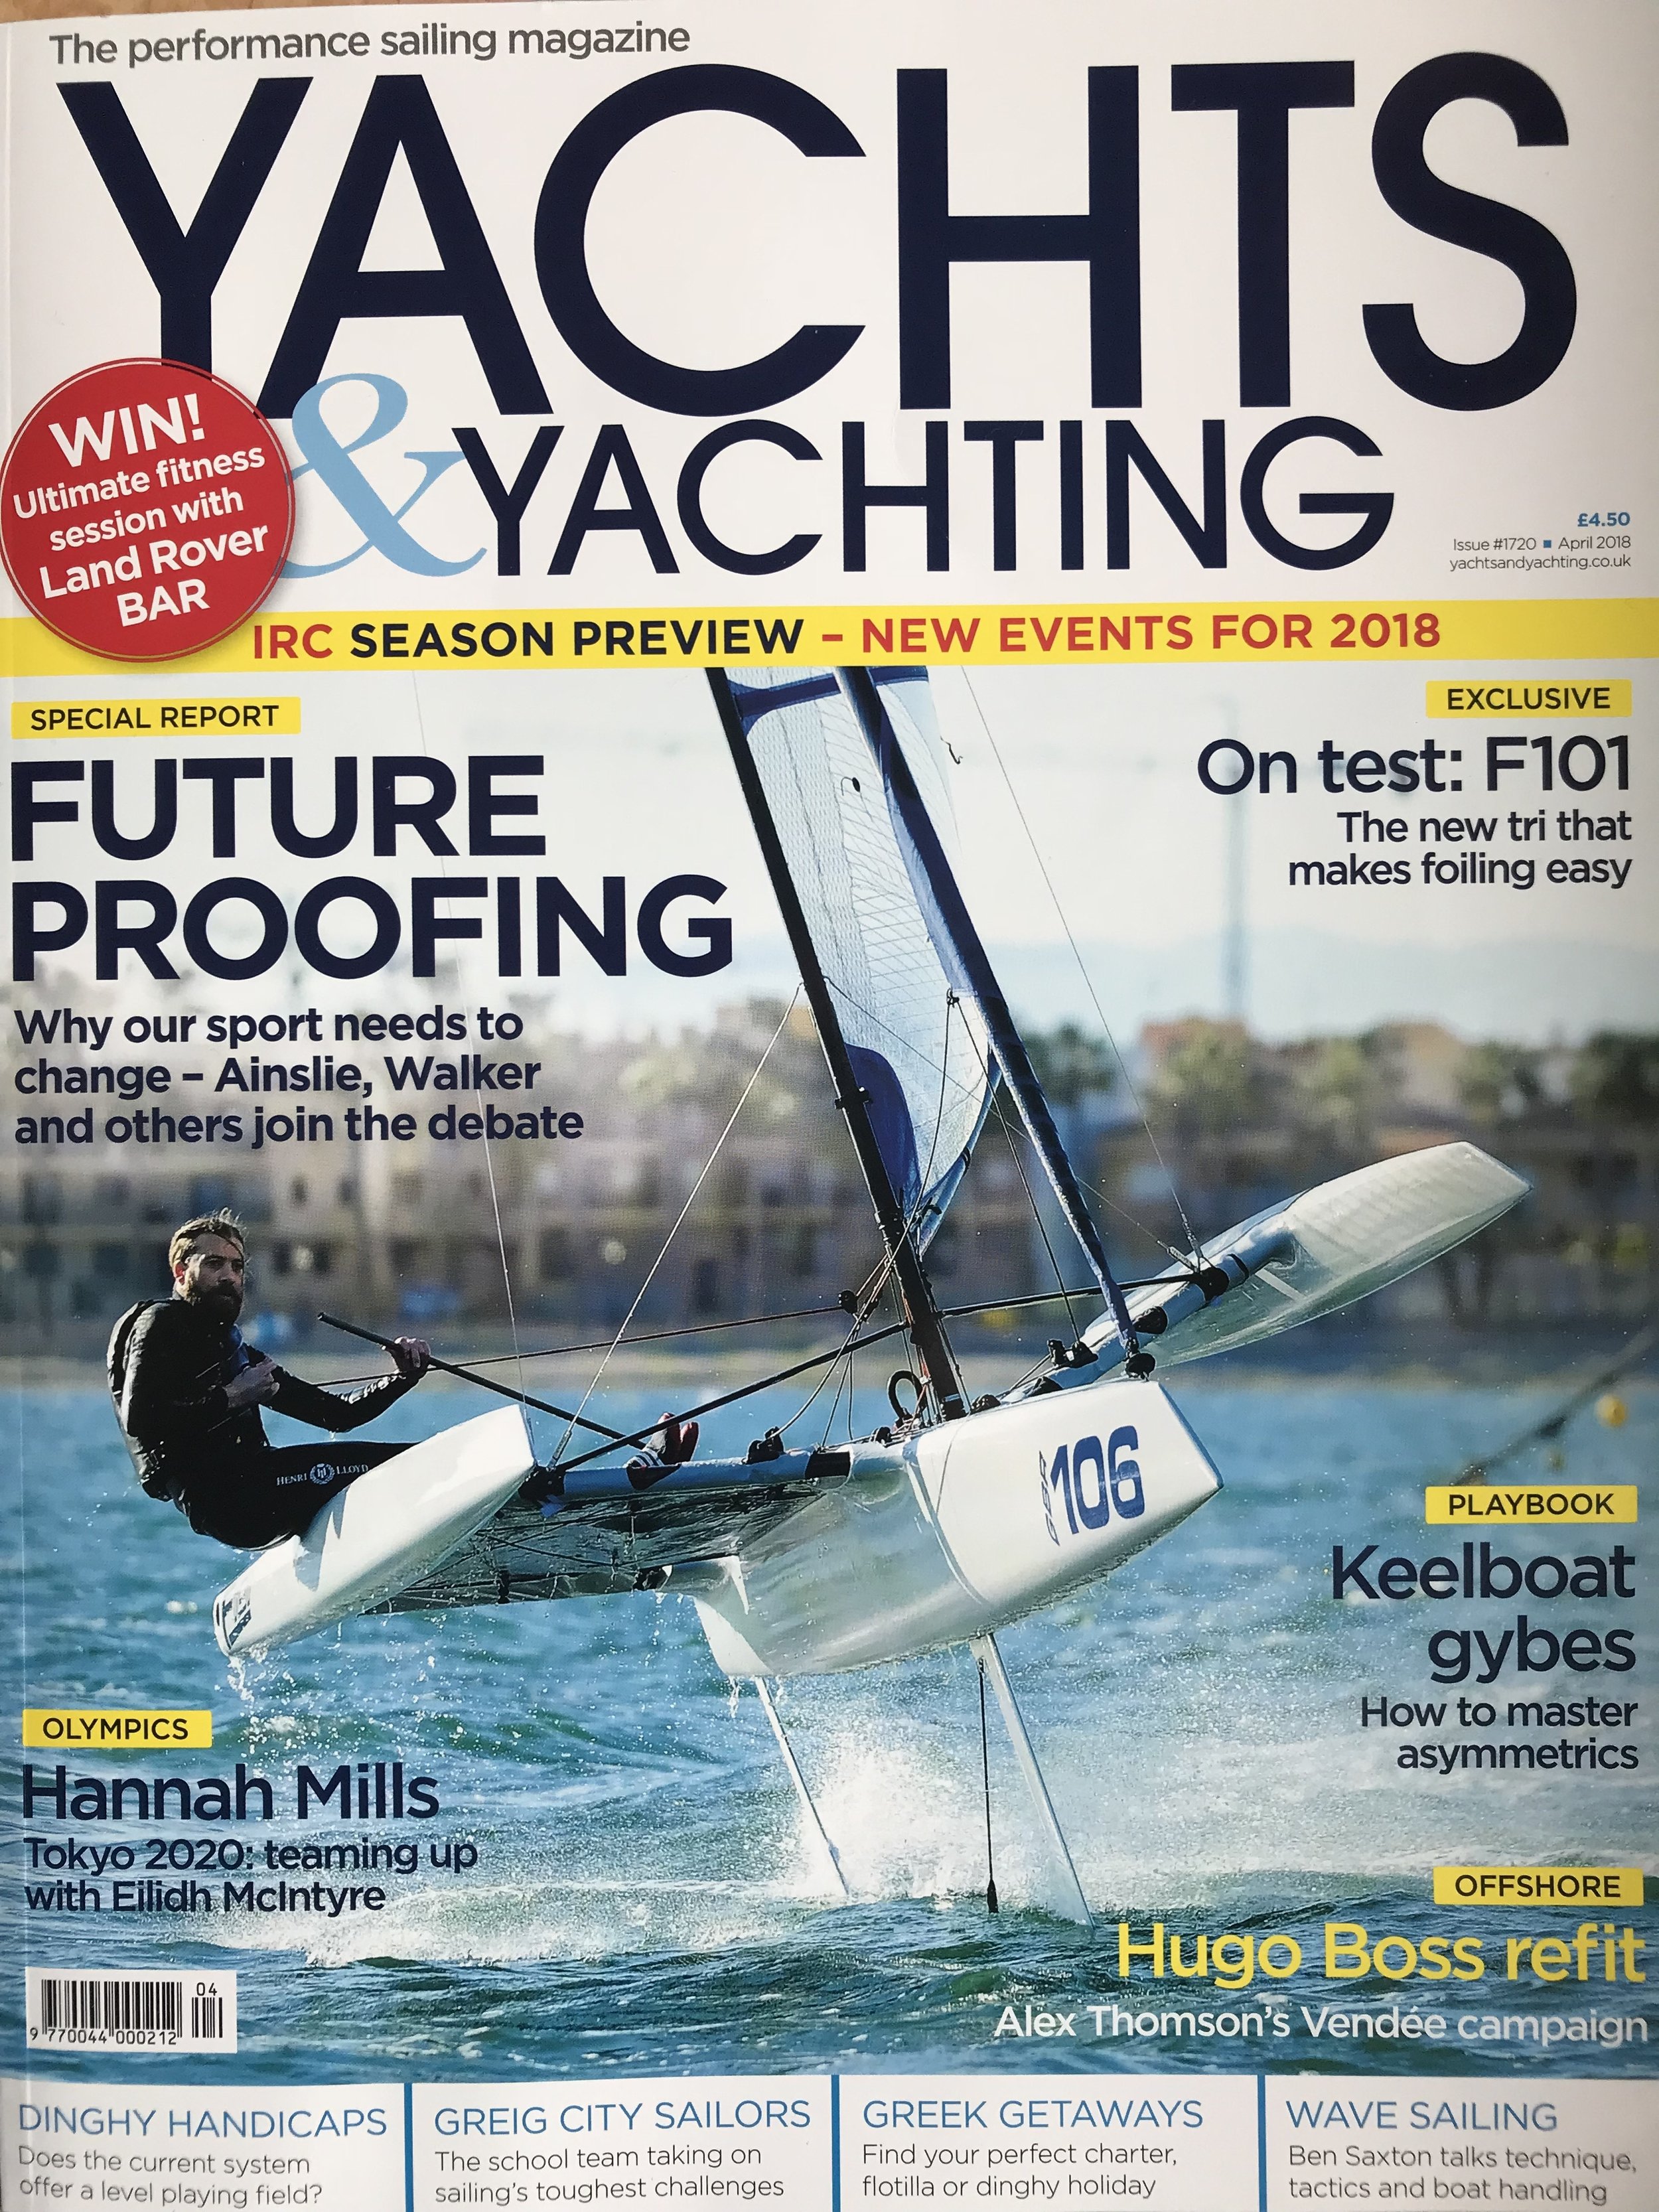 Yachts and Yachting front cover image.jpg